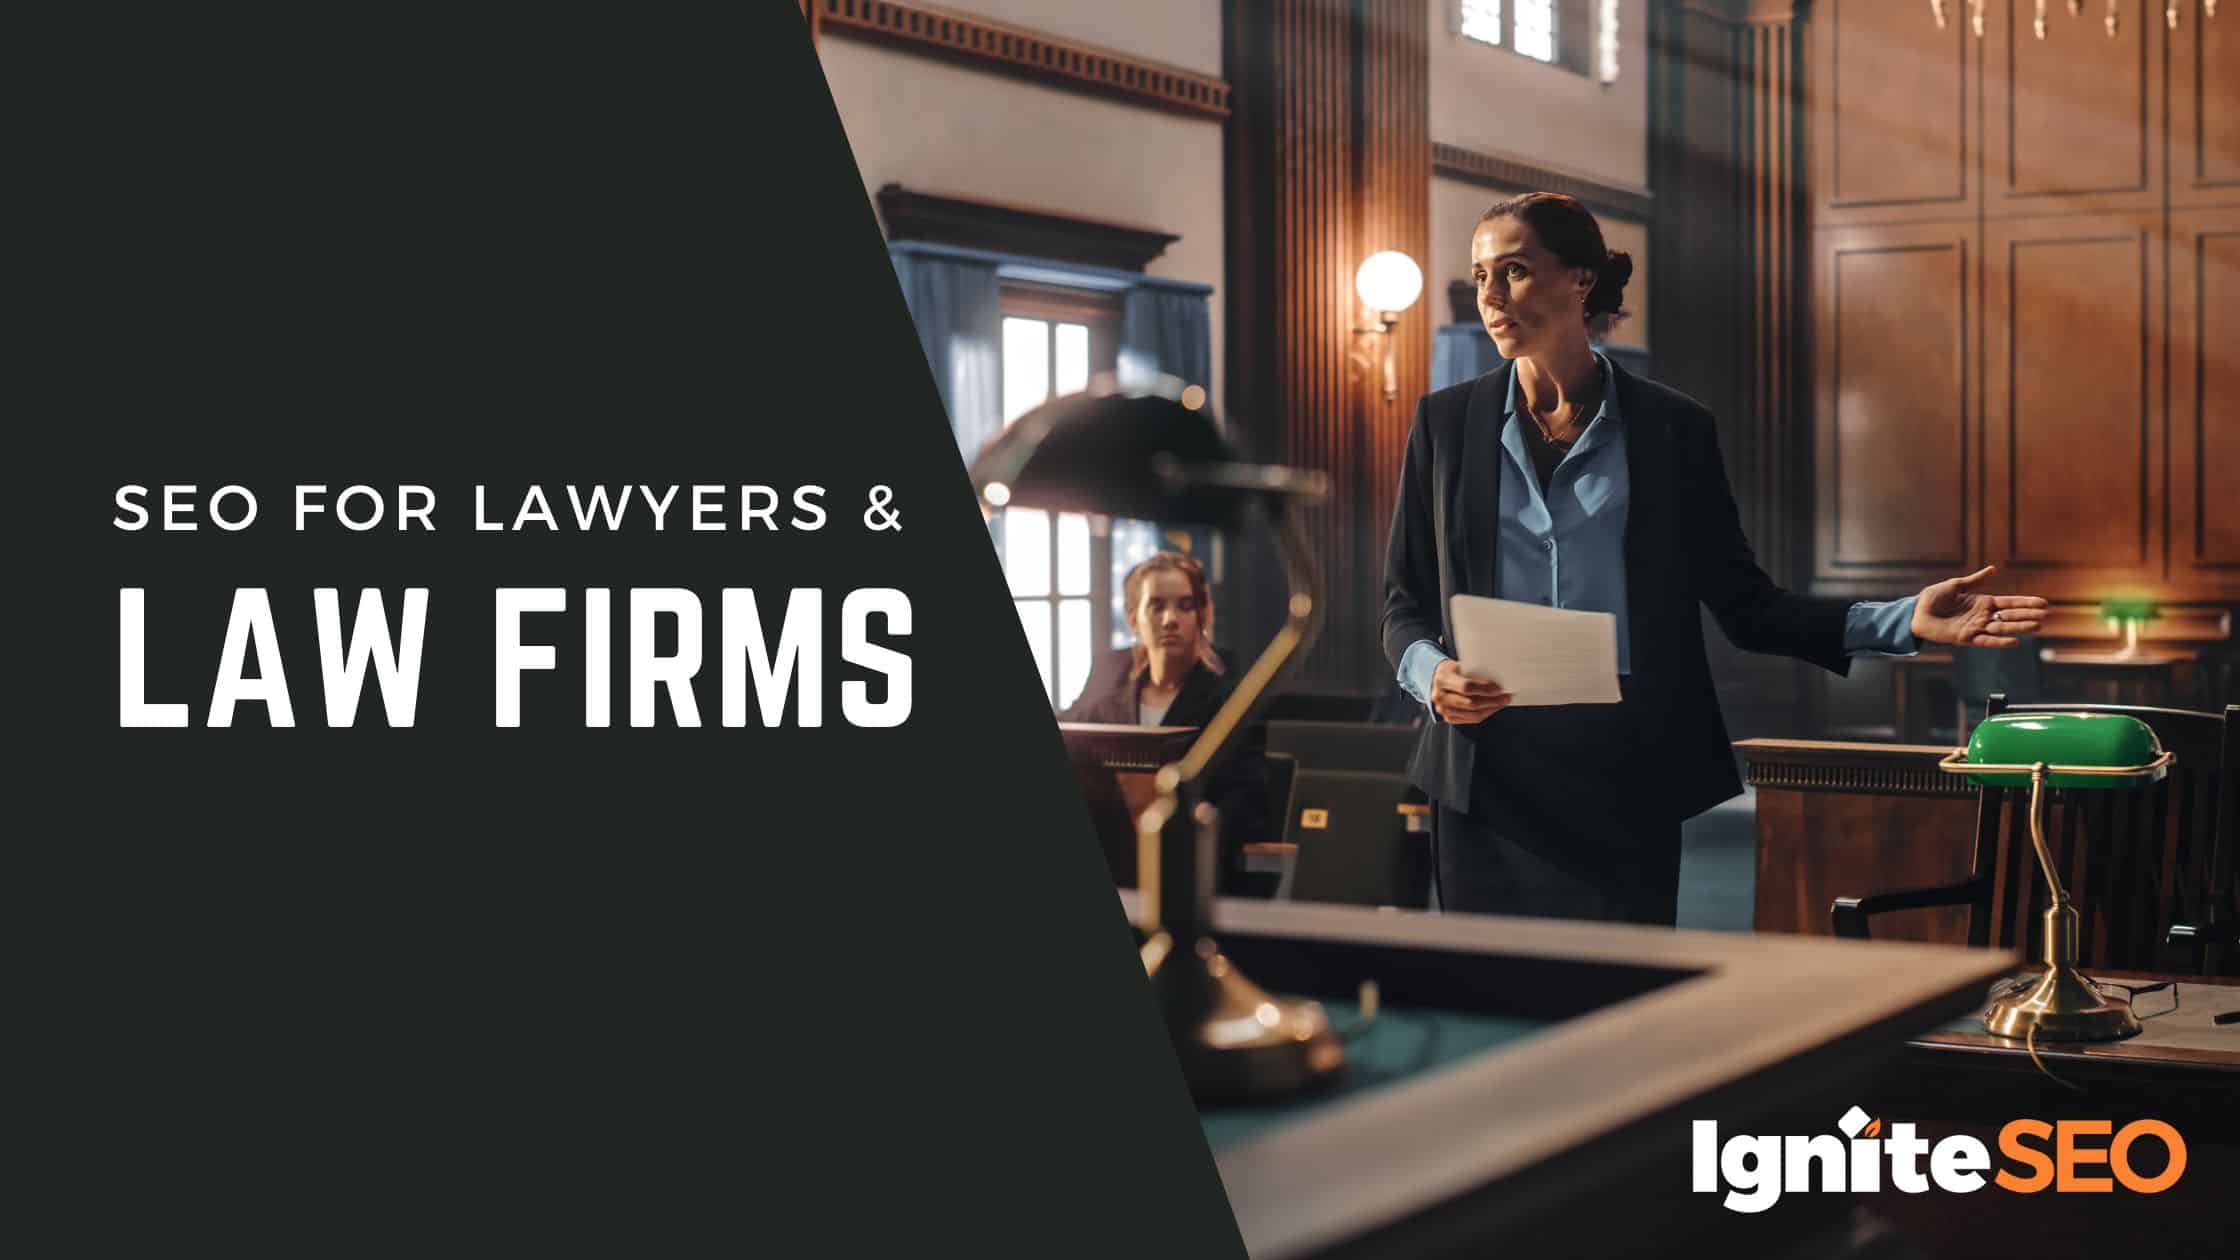 SEO for Lawyers & Law firms